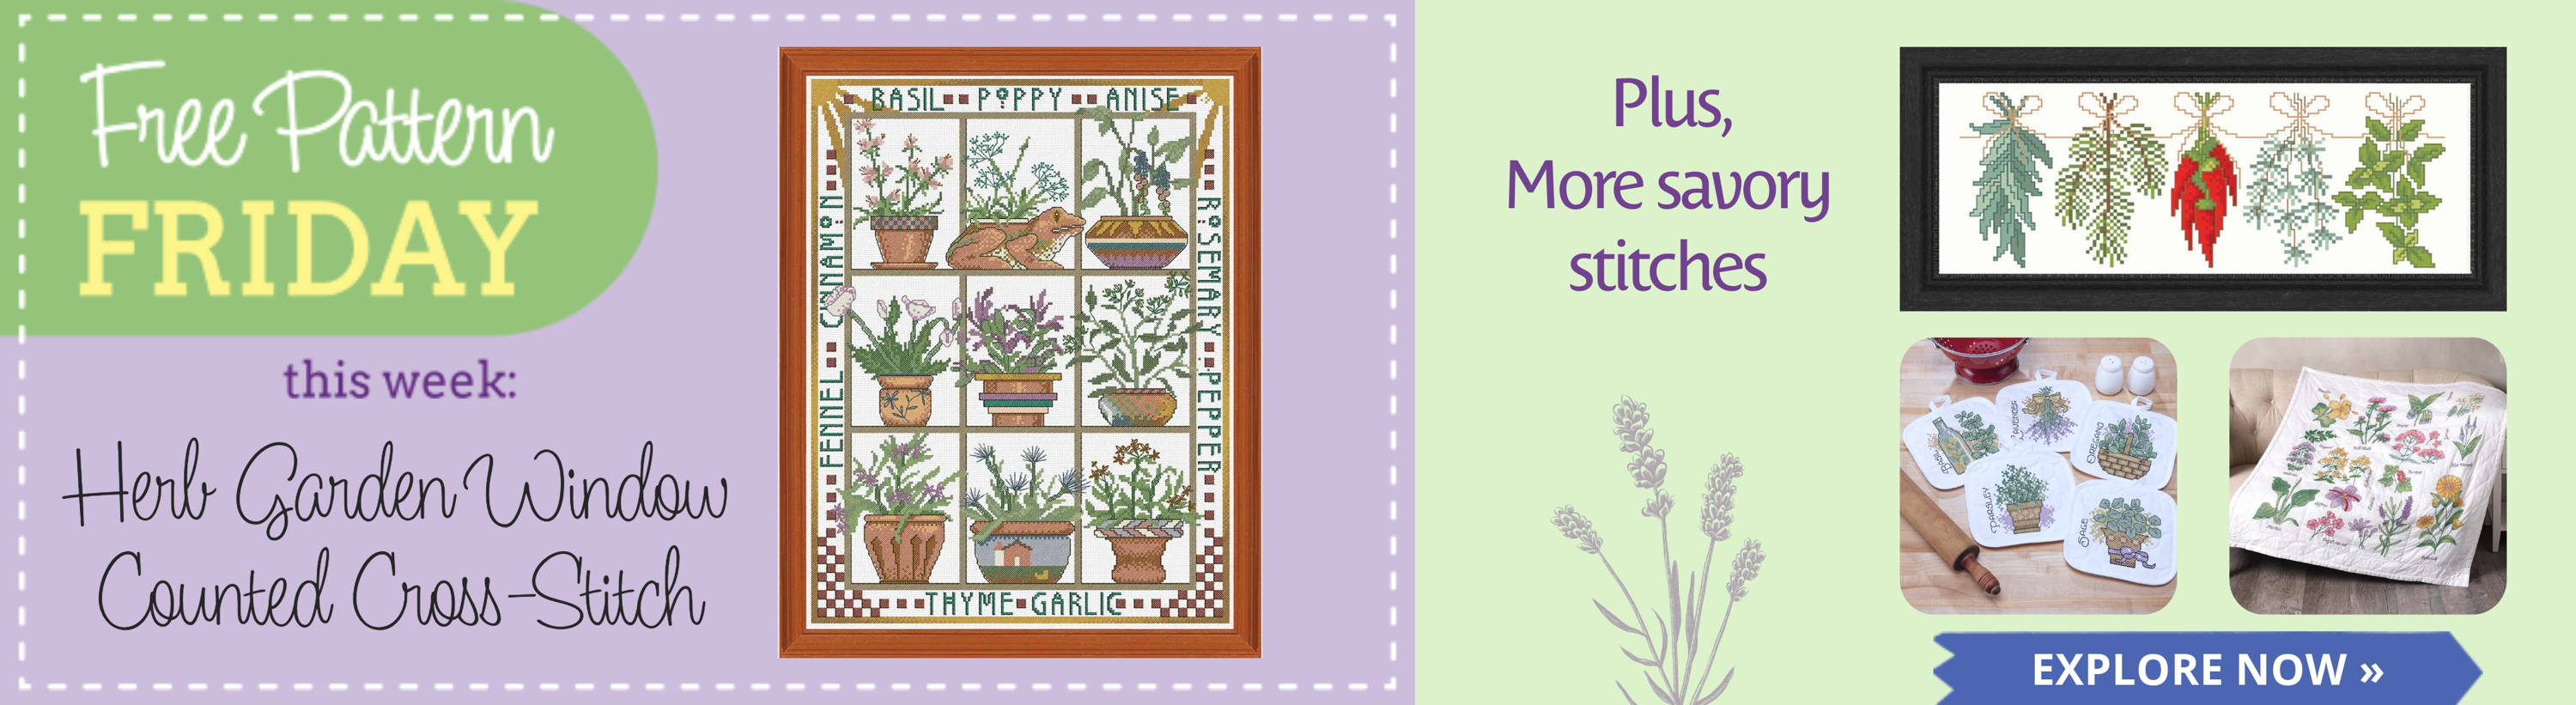 Free Pattern Friday! Herb Garden Window ( Counted Cross-stitch). Plus, more savory stitches to explore. Image: Herb Garden CCS and more herbal needlework projects.